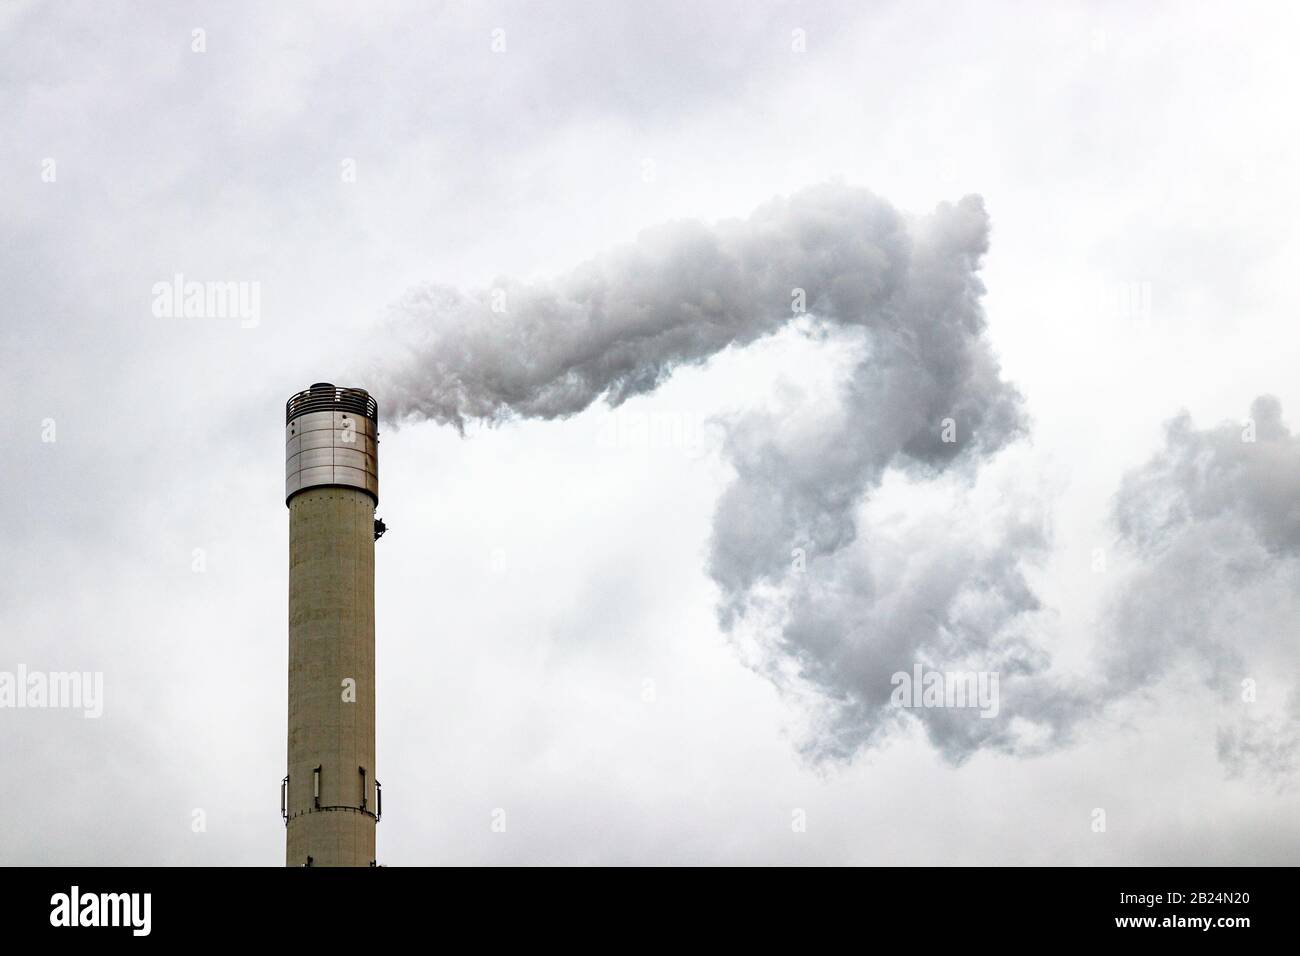 Tall chimney emitting gases into the atmosphere, causing air pollution. Gray, cloudy sky. Stock Photo